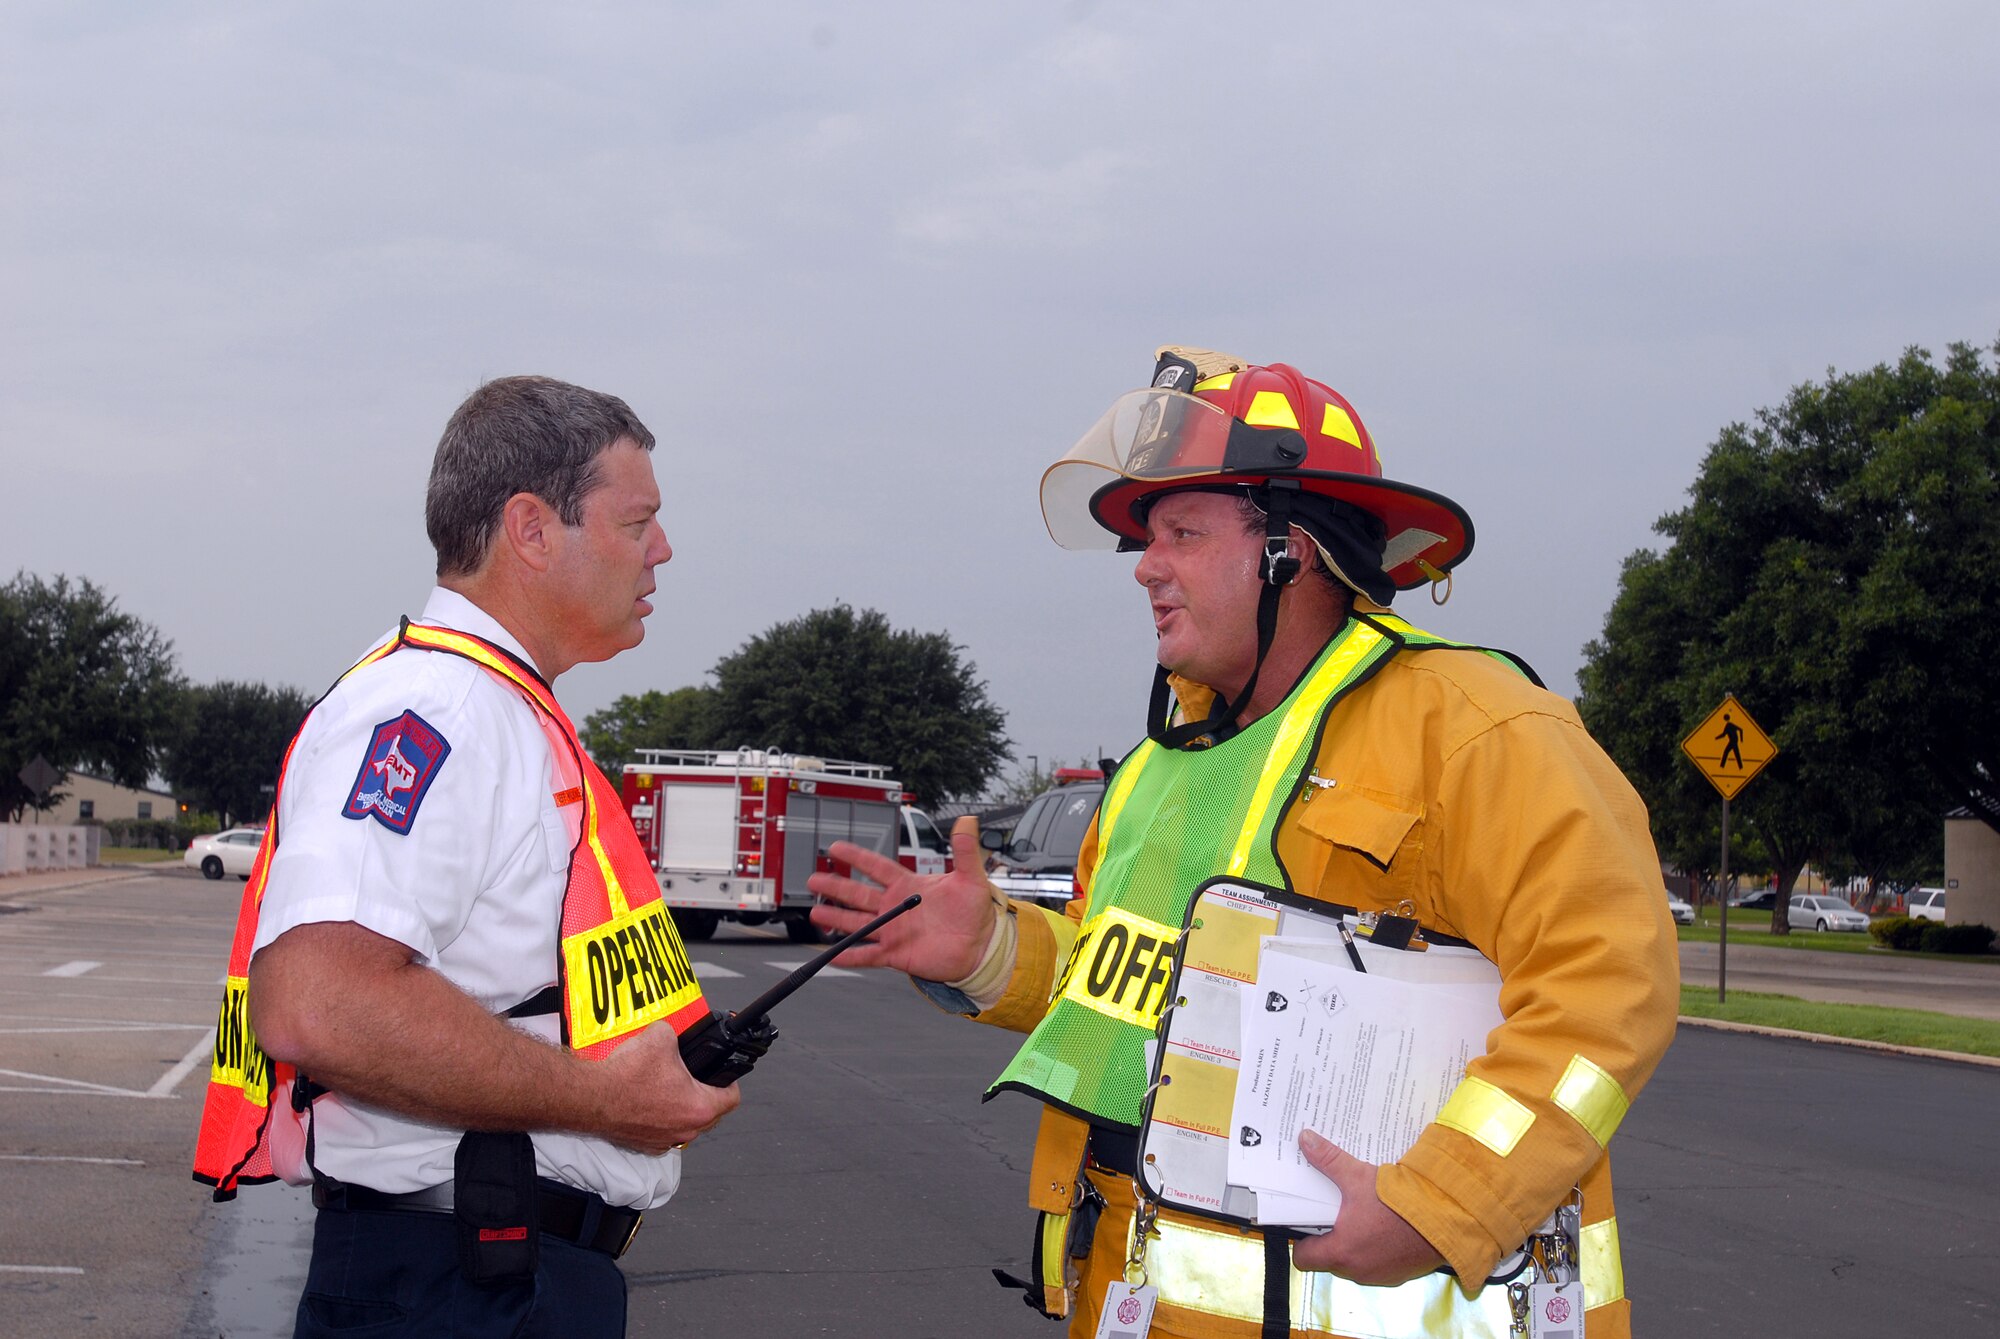 Jeff Wilkins (left), deputy chief with the Goodfellow Fire Department, discusses strategy with Gene Crabtree, also of the Goodfellow Fire Department, during the base-wide disaster exercise Aug. 2. (U.S. Air Force photo by Tech. Sgt. Gina O’Bryan)